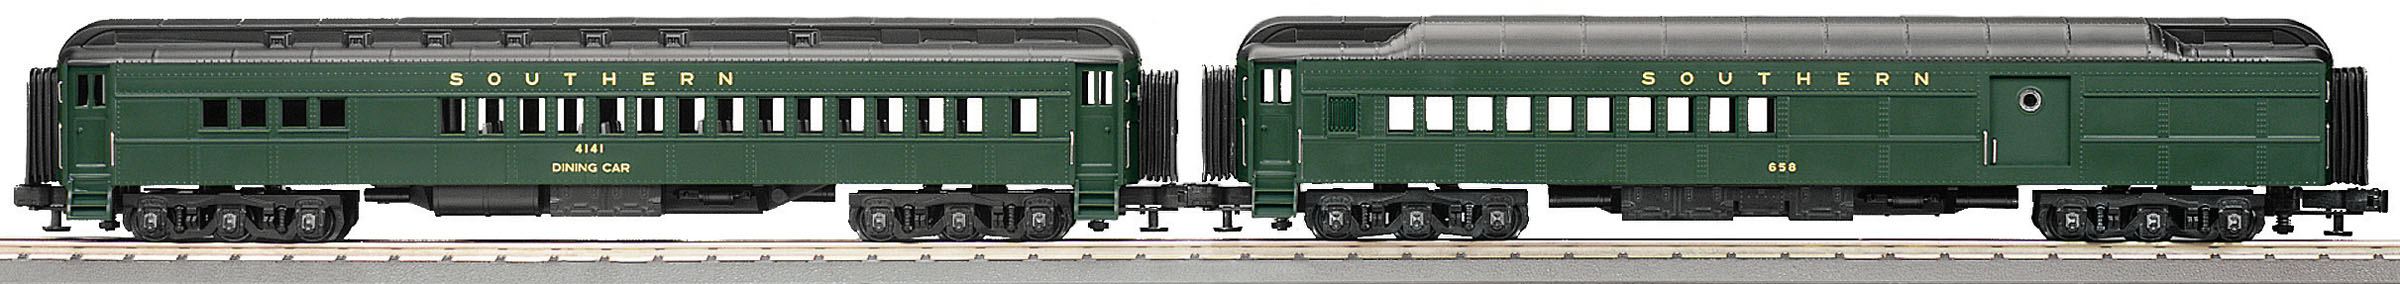 MTH 3 Rail 2 Car Madison Baggage/ Coach Set Chesapeake and Ohio for sale online 